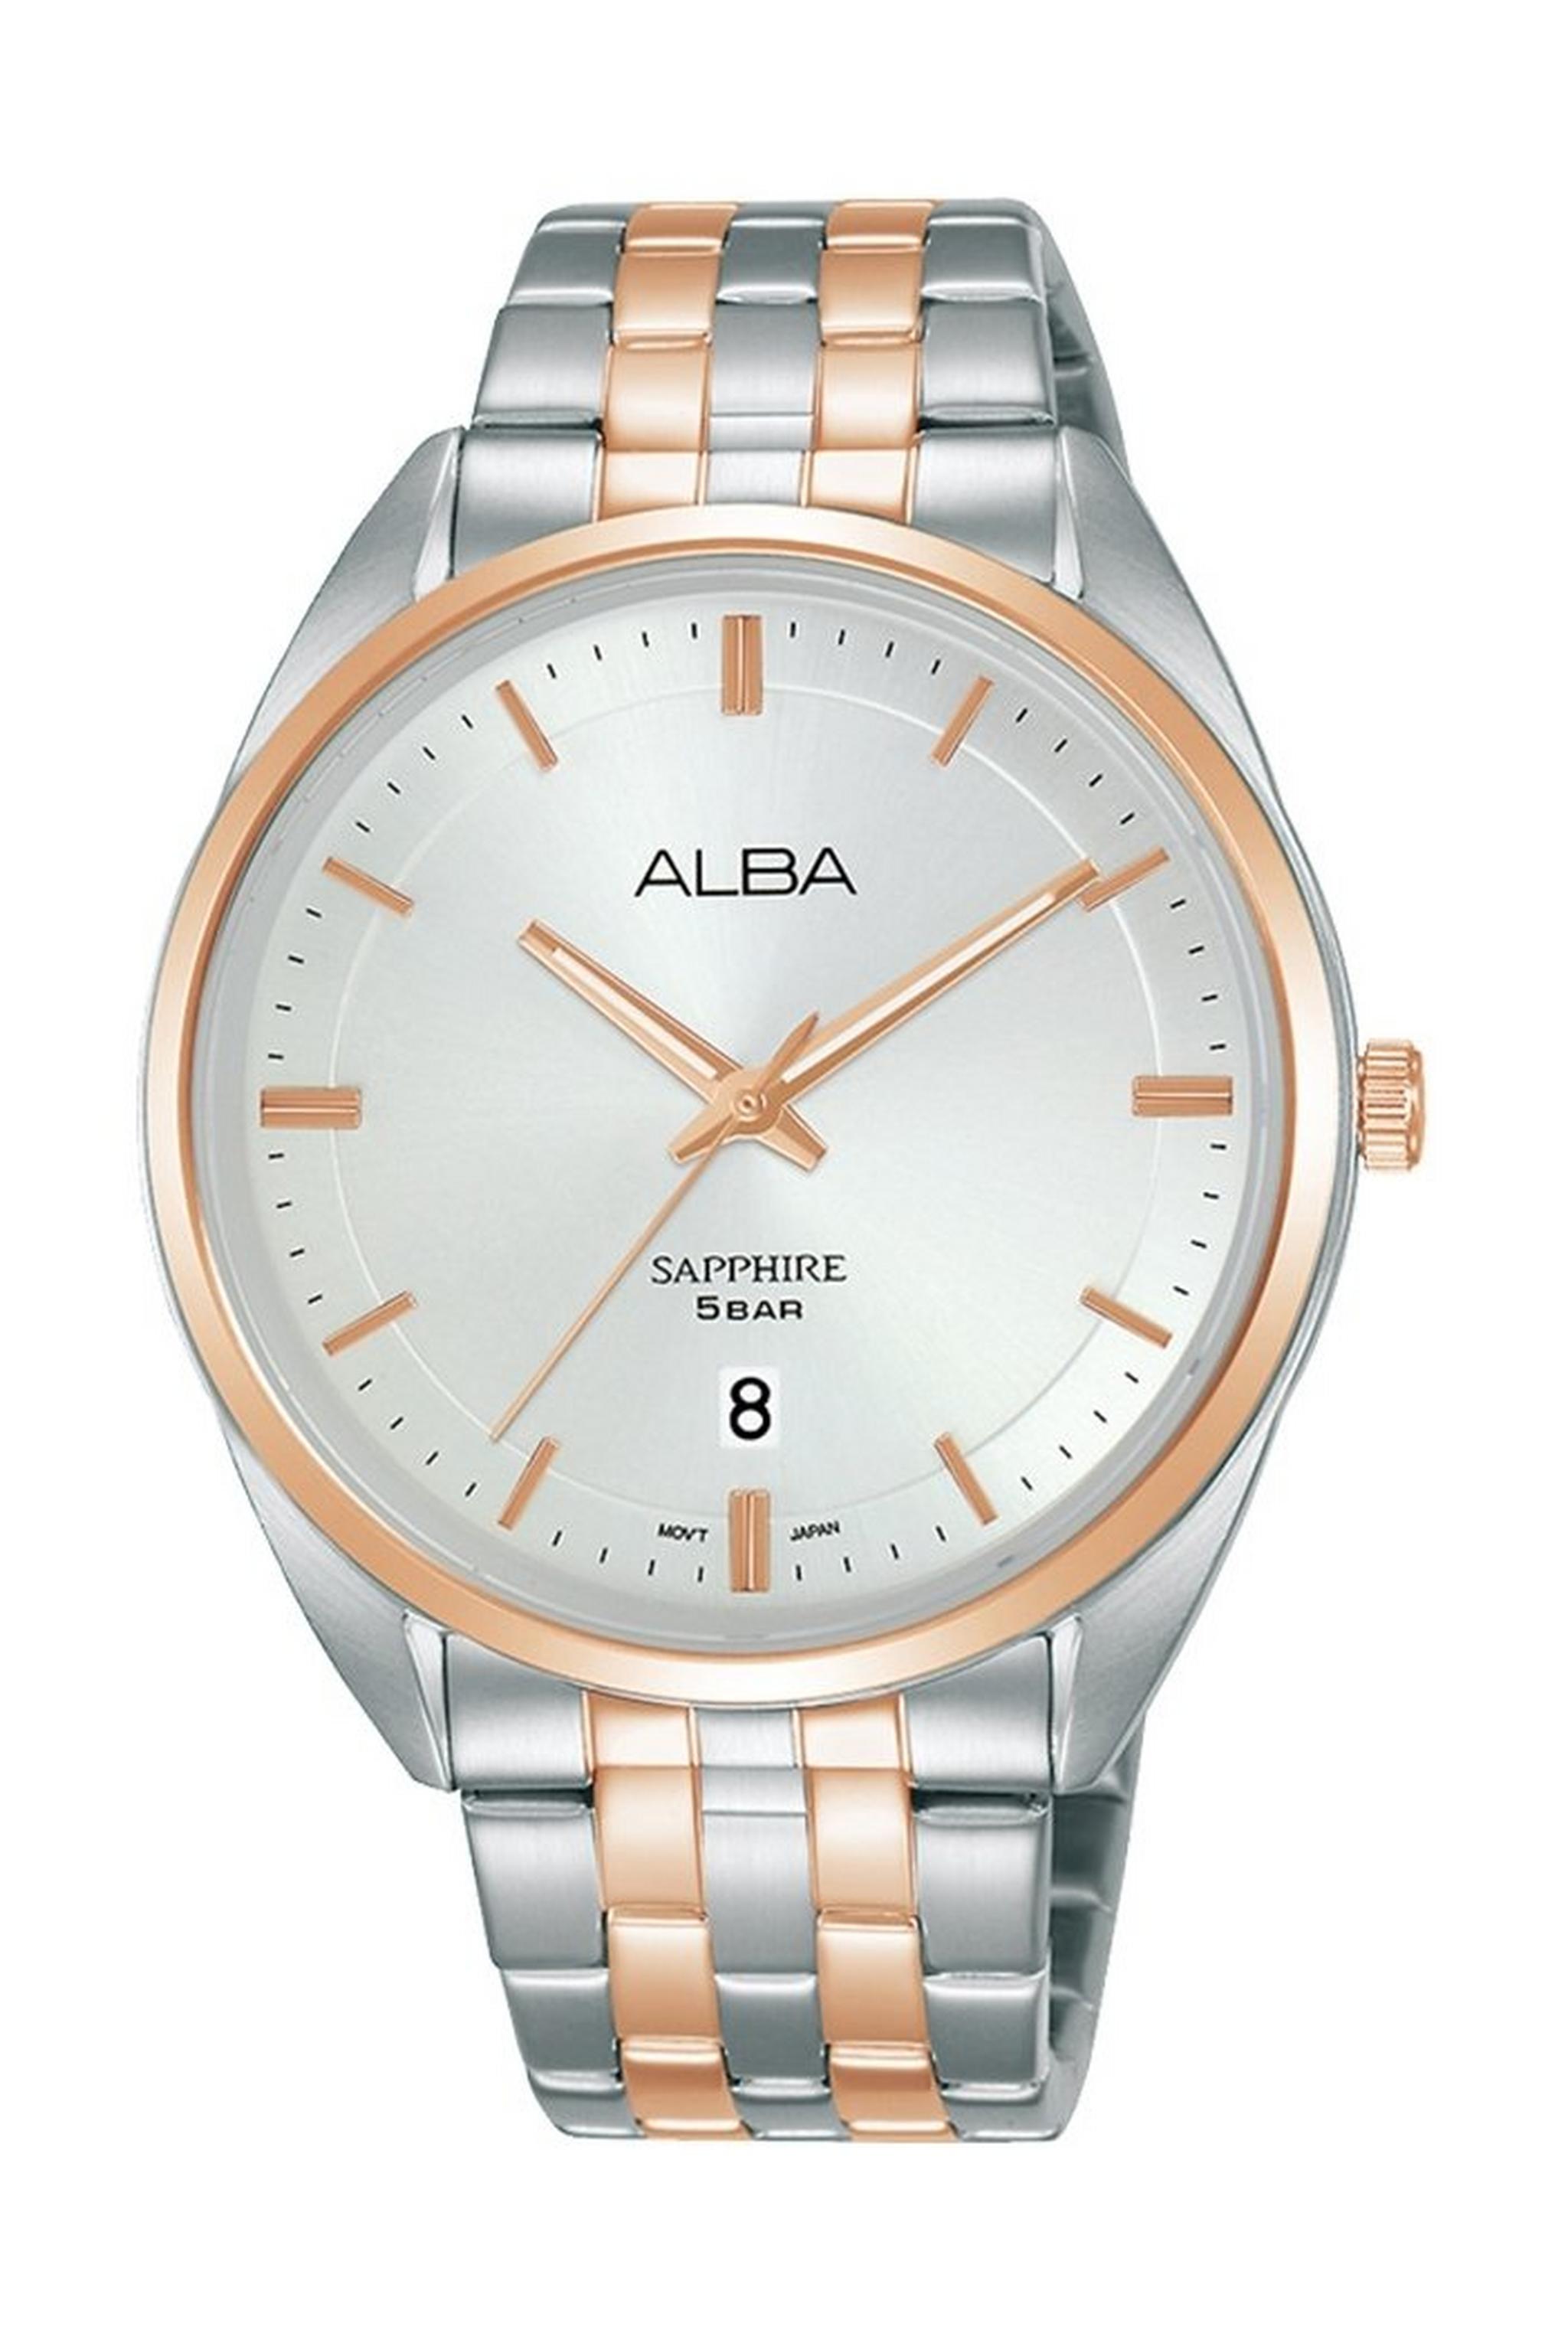 Alba 41mm Gent's Metal Analog Casual Watch - AS9L08X1